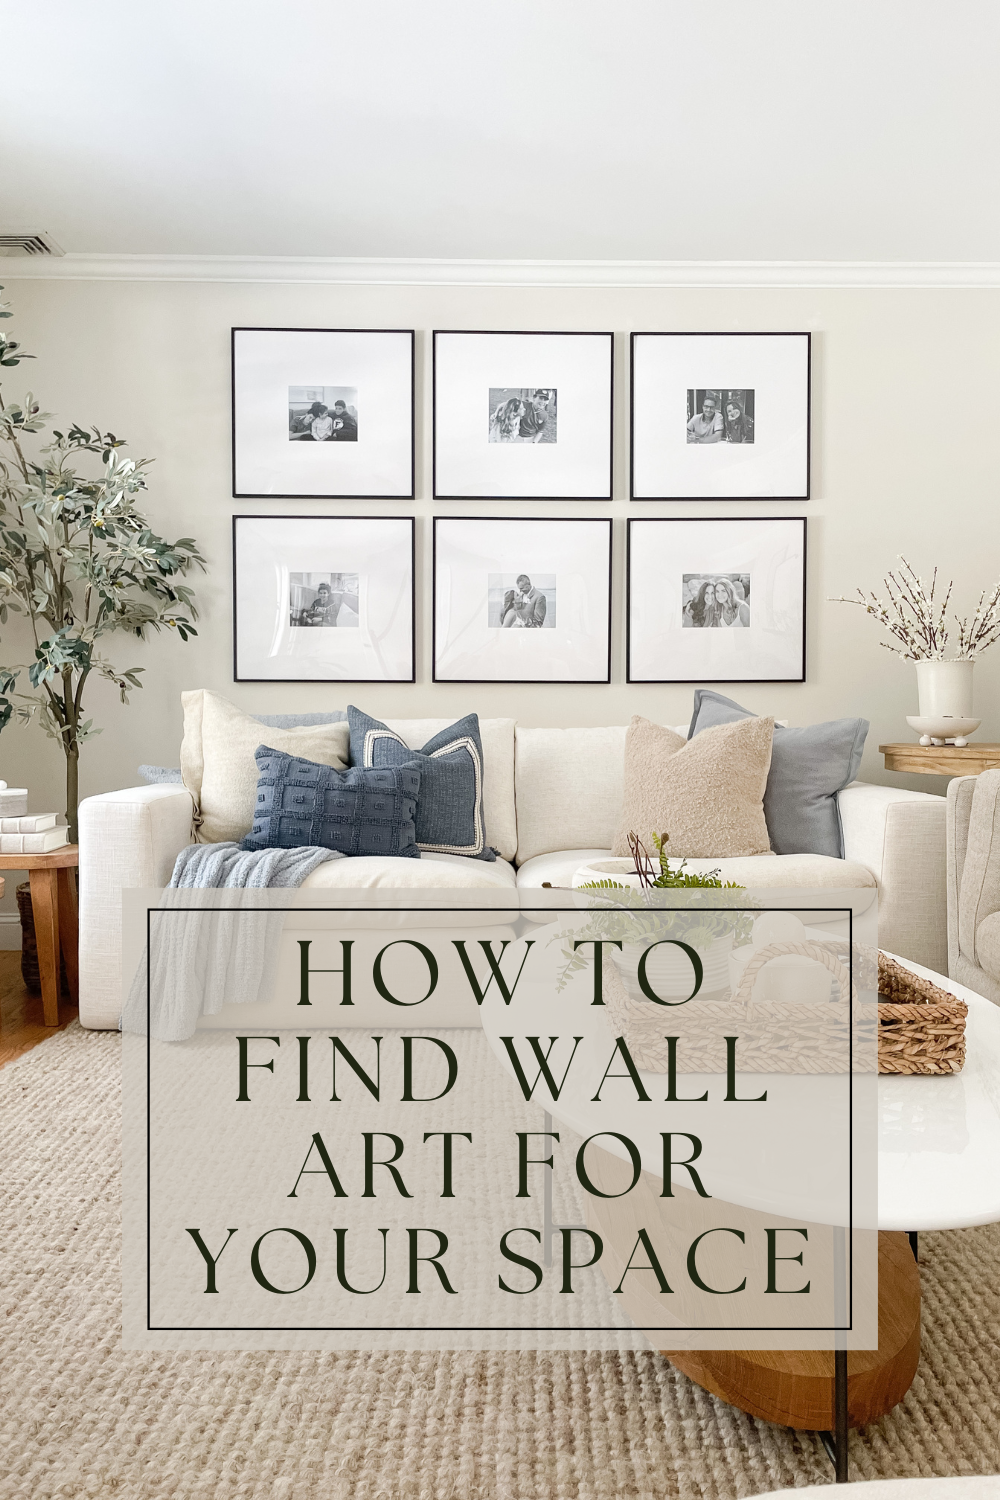 How to choose wall art for your space, wall art, spring decor, spring, how to find wall art for your space, home decor, spring home ideas, spring home decor, wall art finds, spring home inspiration, home decor ideas, spring interior design